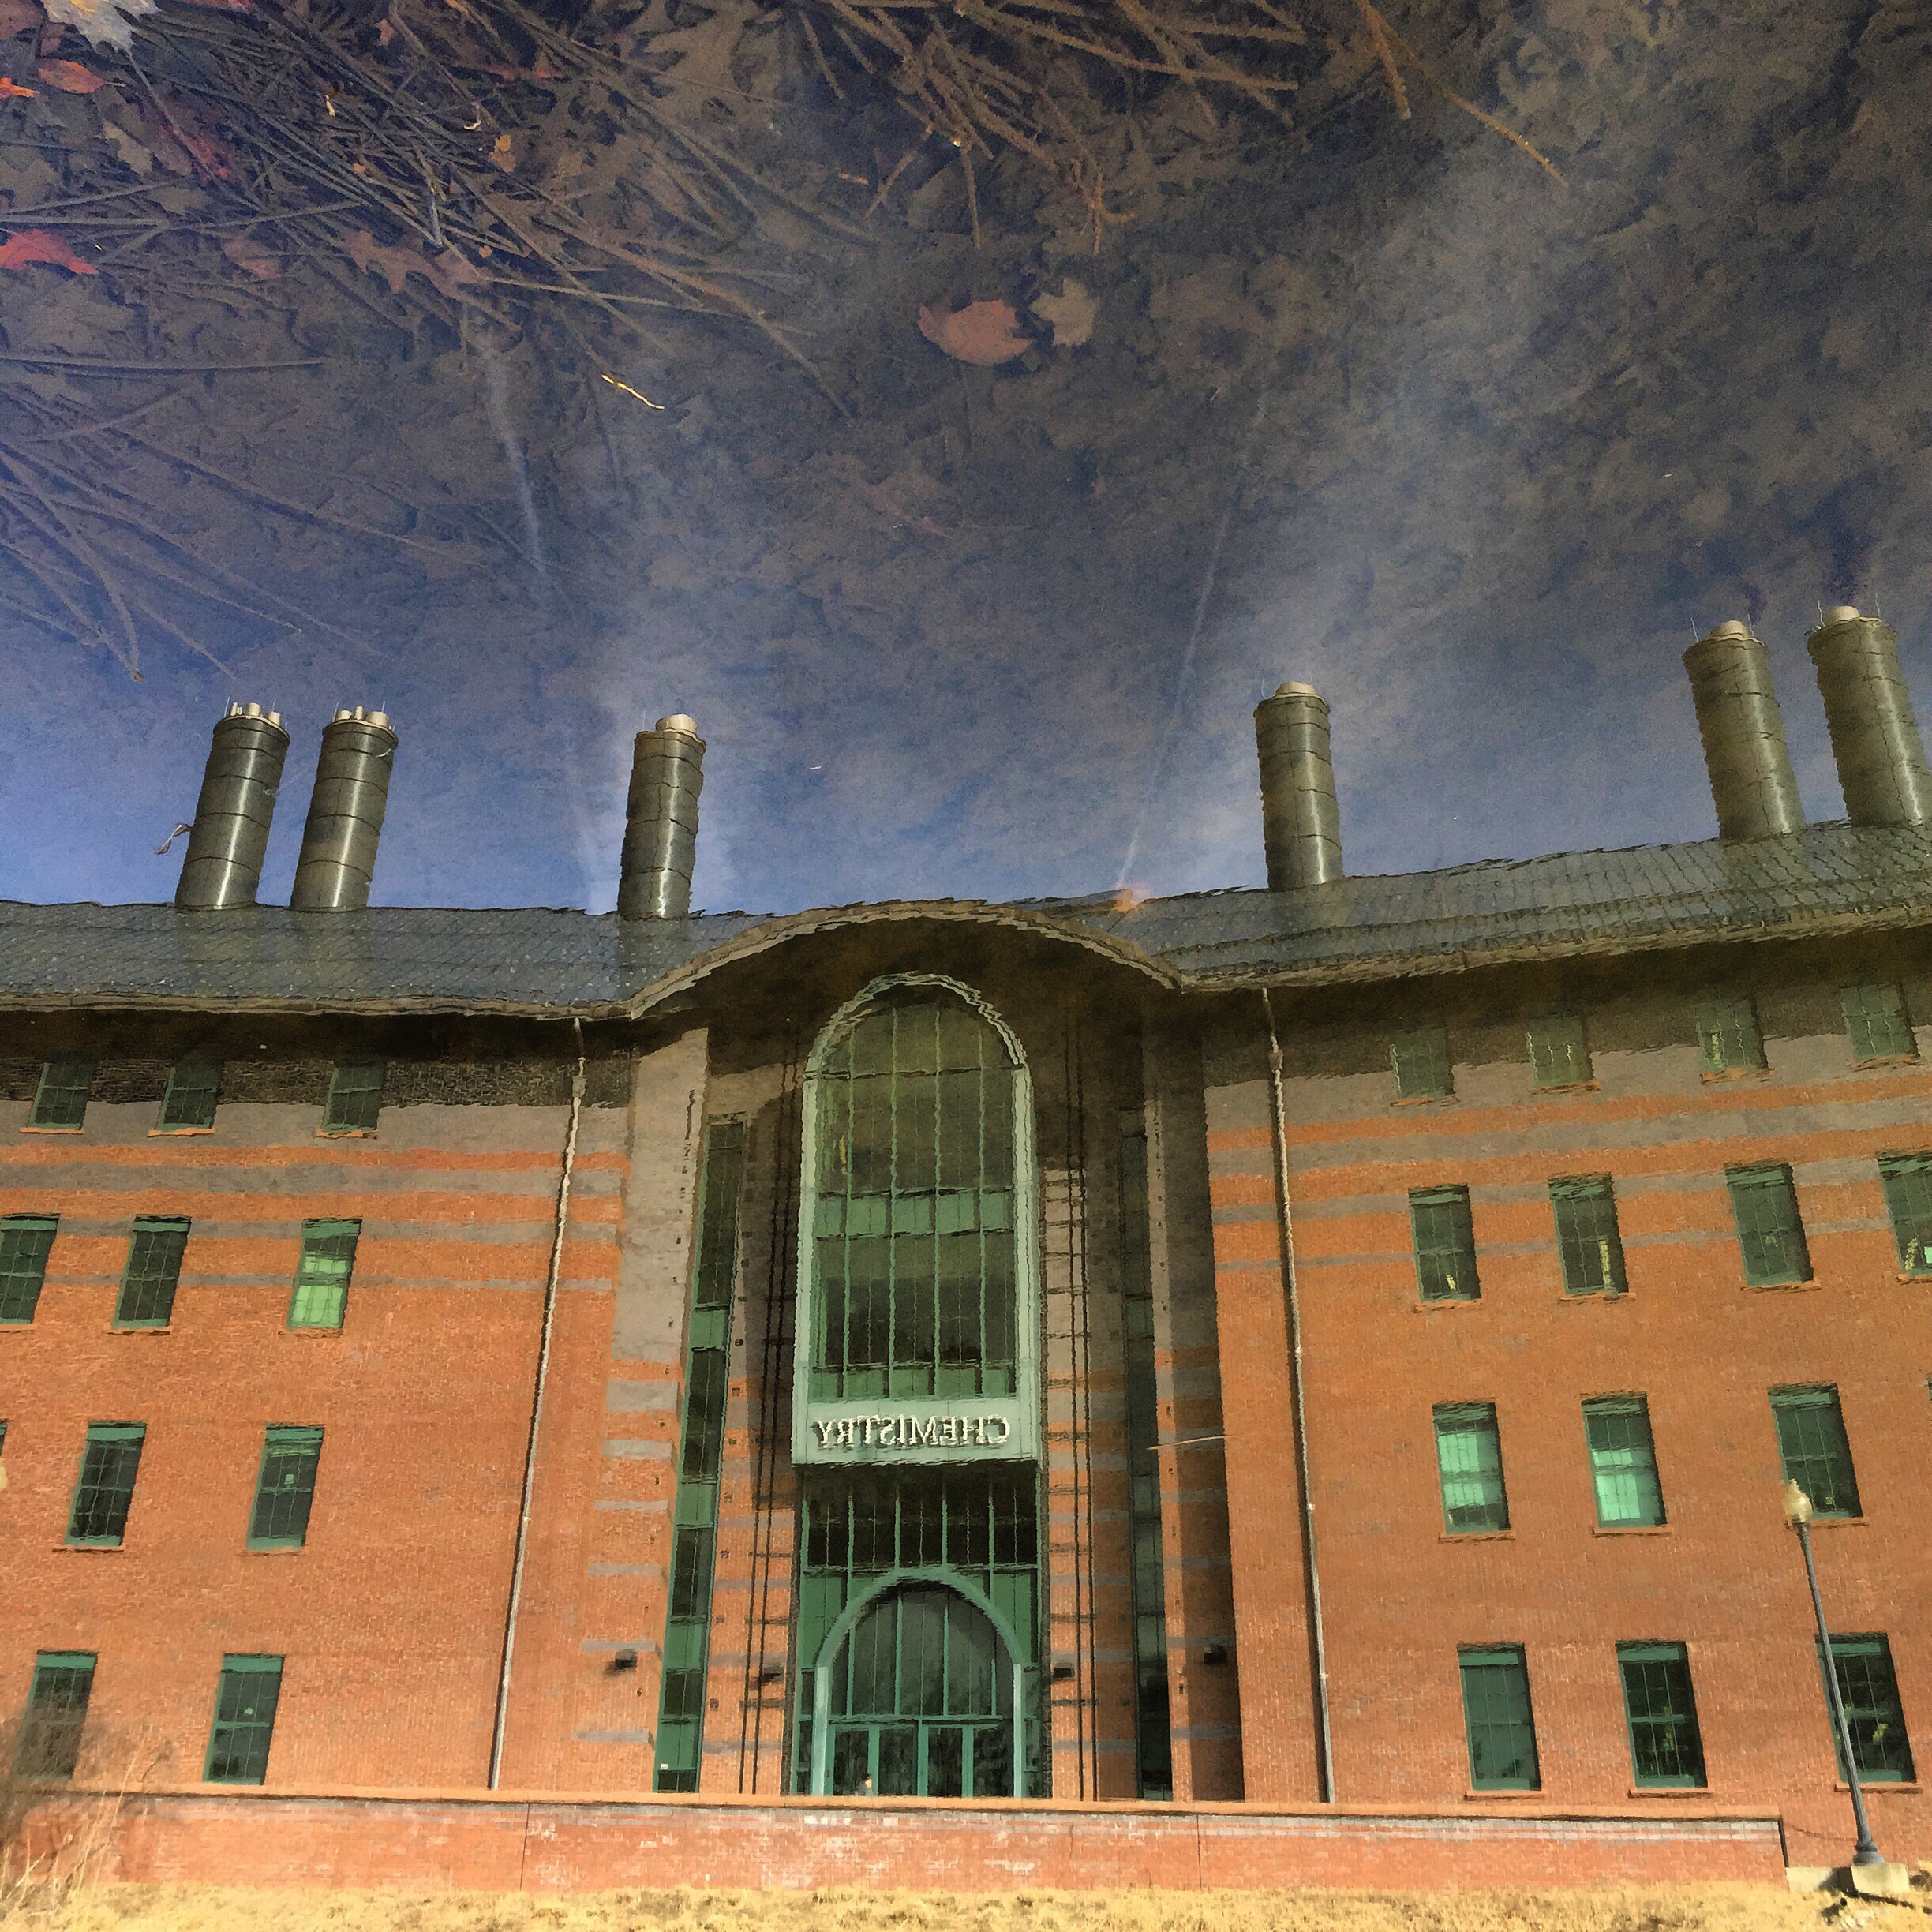 Chemistry building in reflection of Swan Lake